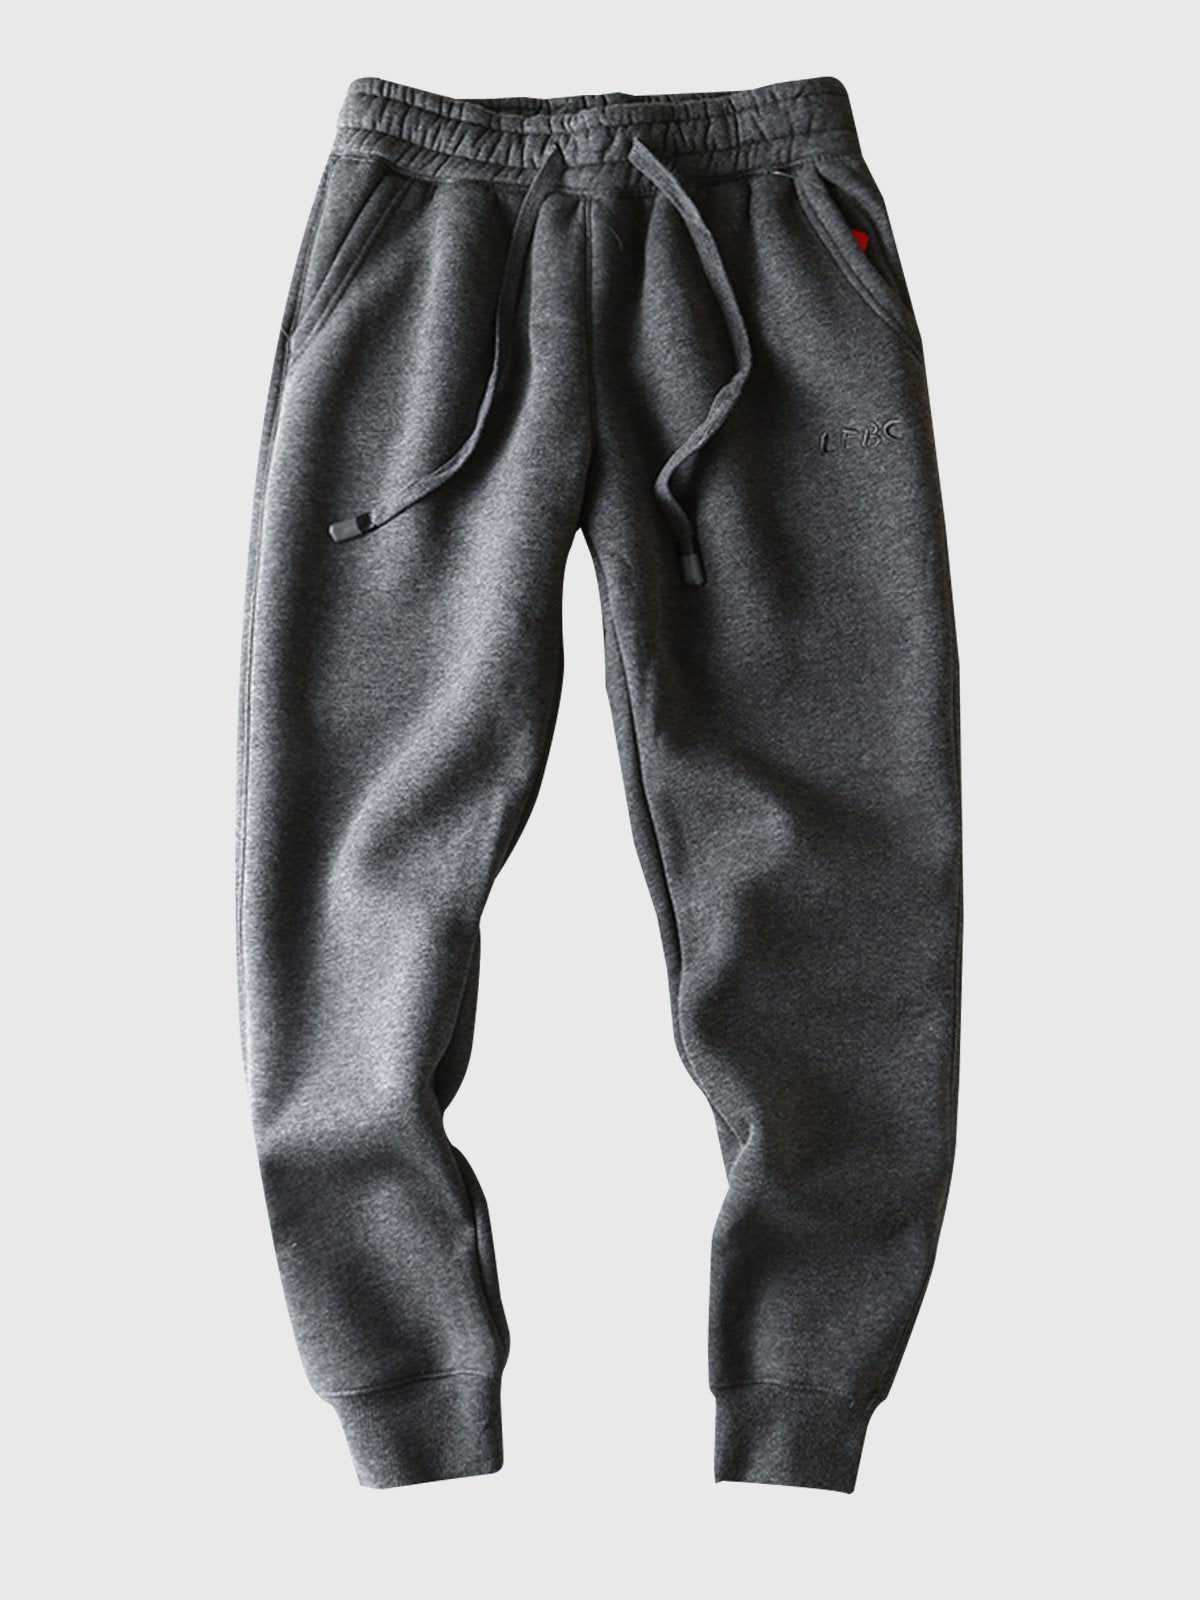 M's Relaxed Fit Tapered Fleece Sweatpants-Zittor